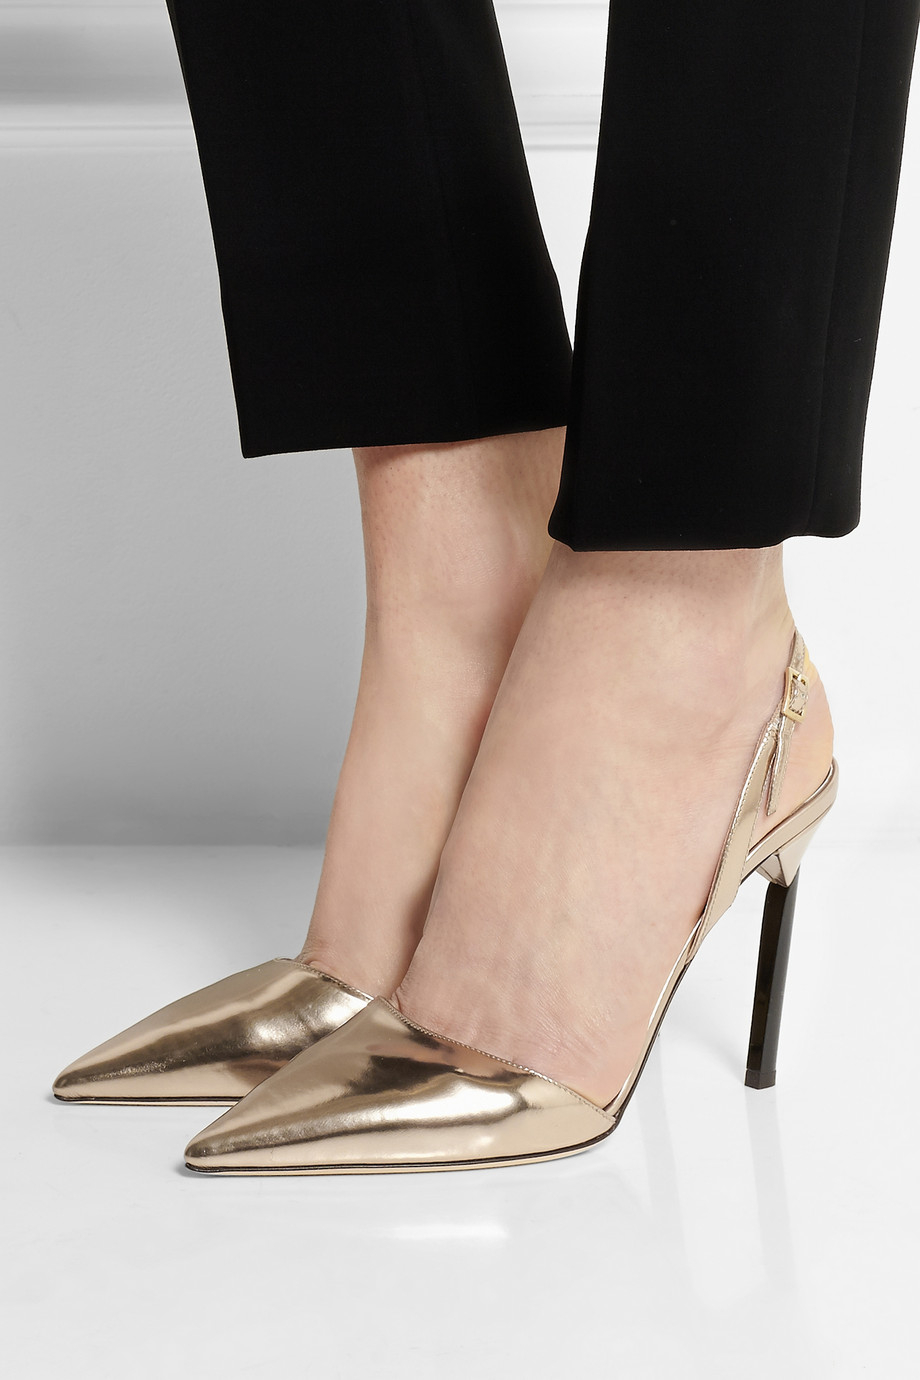 Jimmy Choo Devout Mirrored-Leather Pumps in Rose Gold (Pink) | Lyst